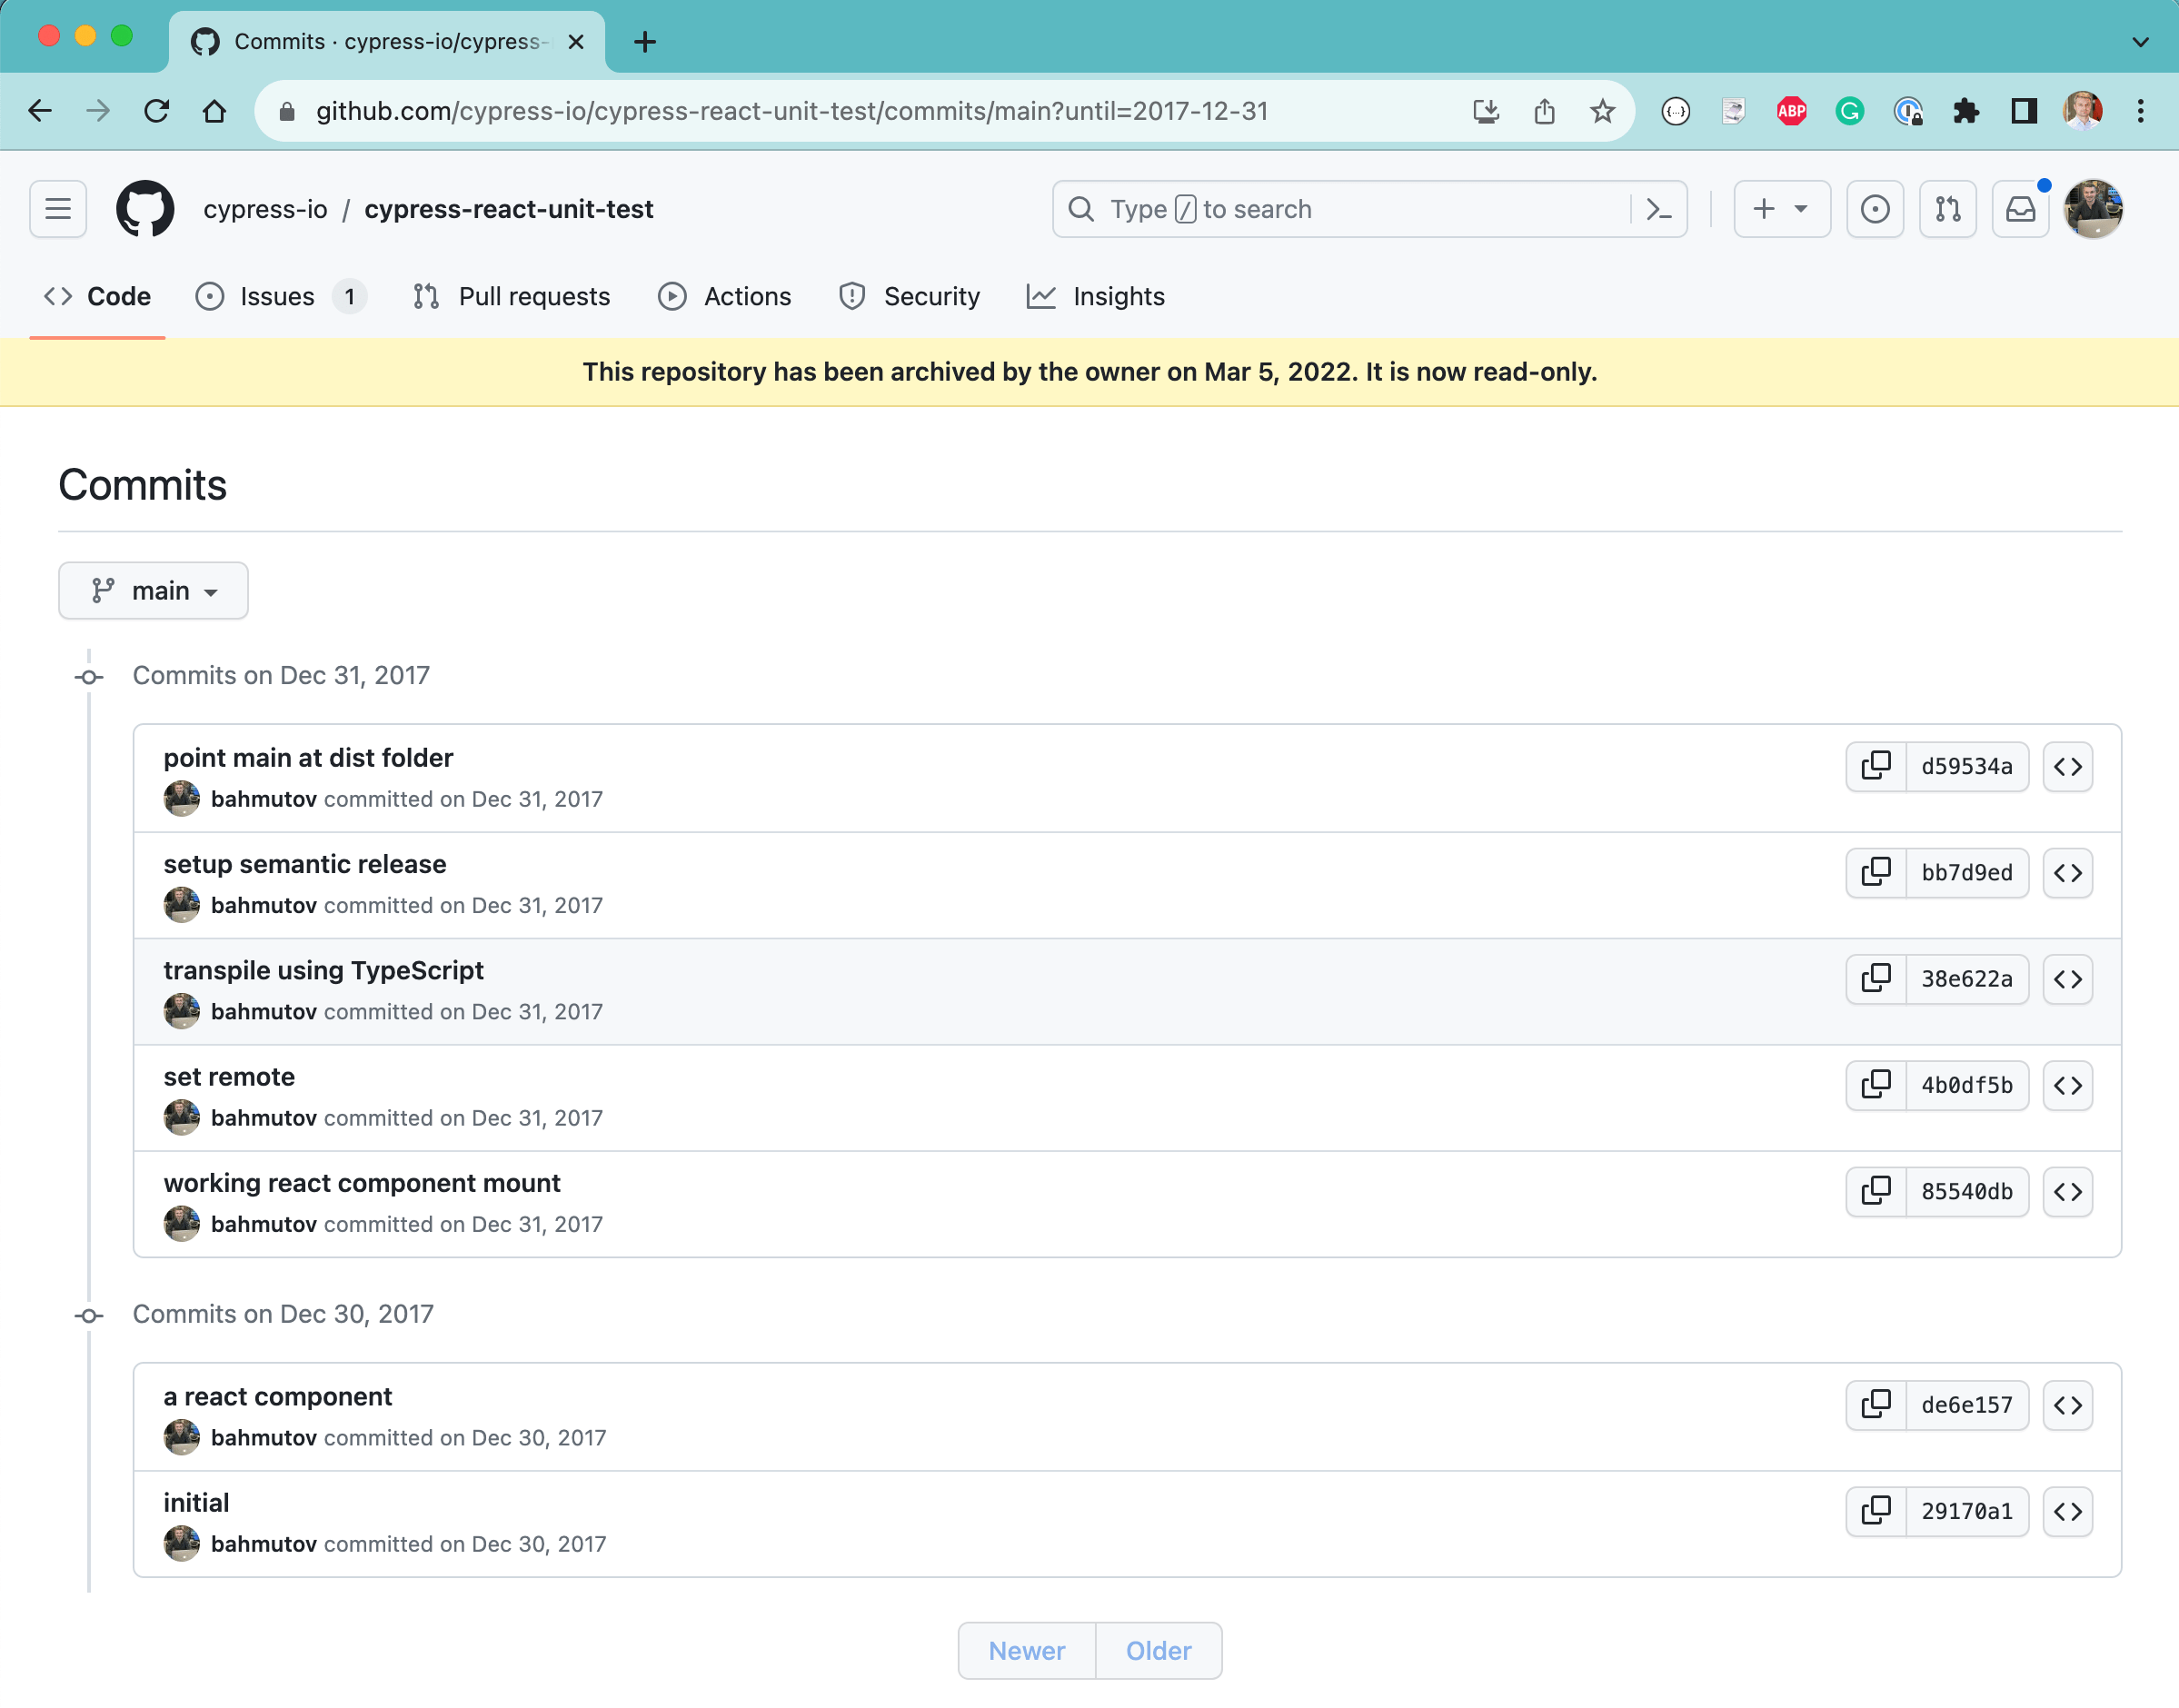 The commits that started Cypress React component testing